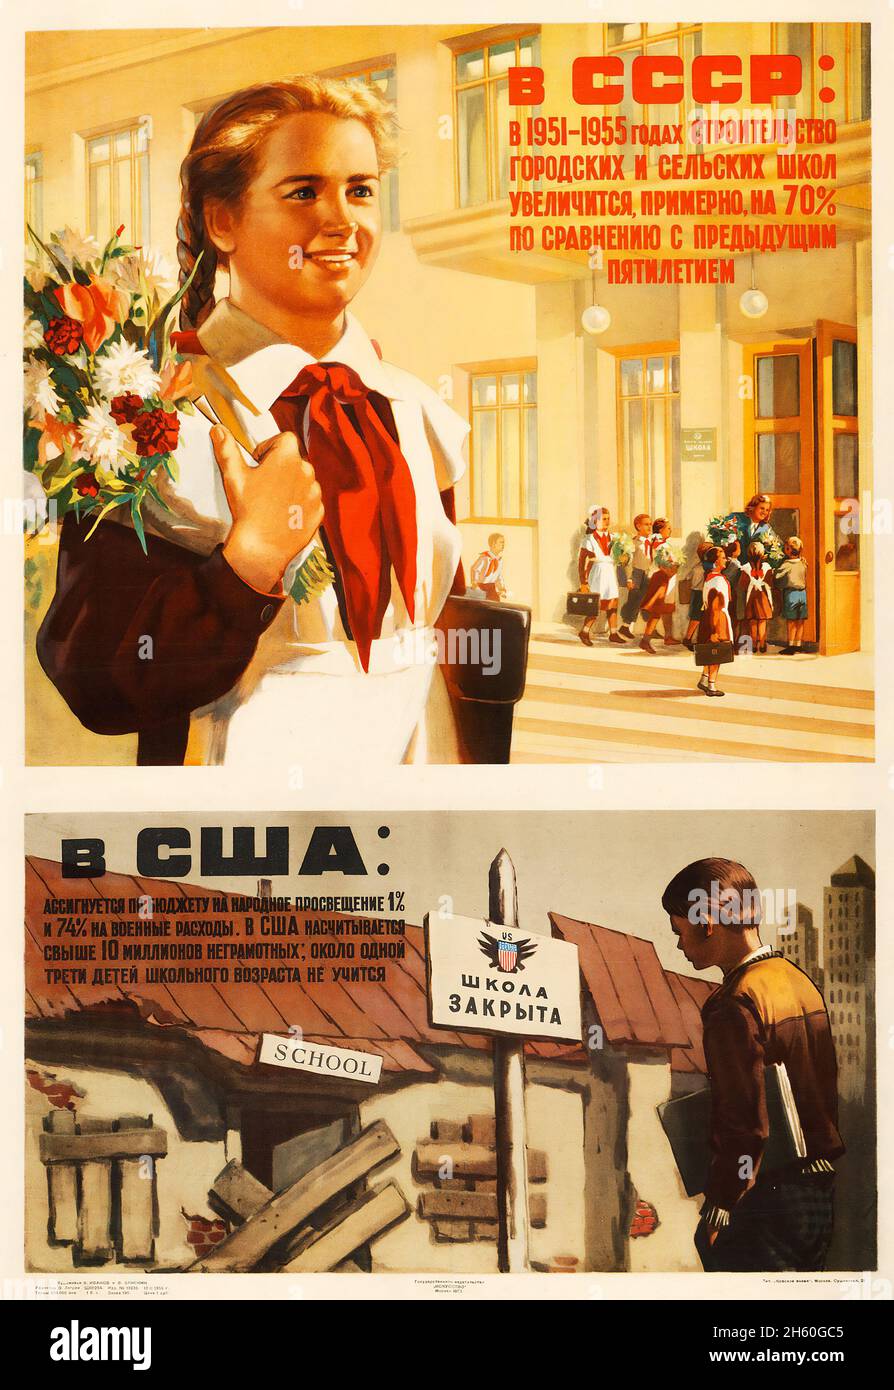 Schools in the USSR and the USA (Moscow, 1955). Russian Propaganda Poster. Stock Photo